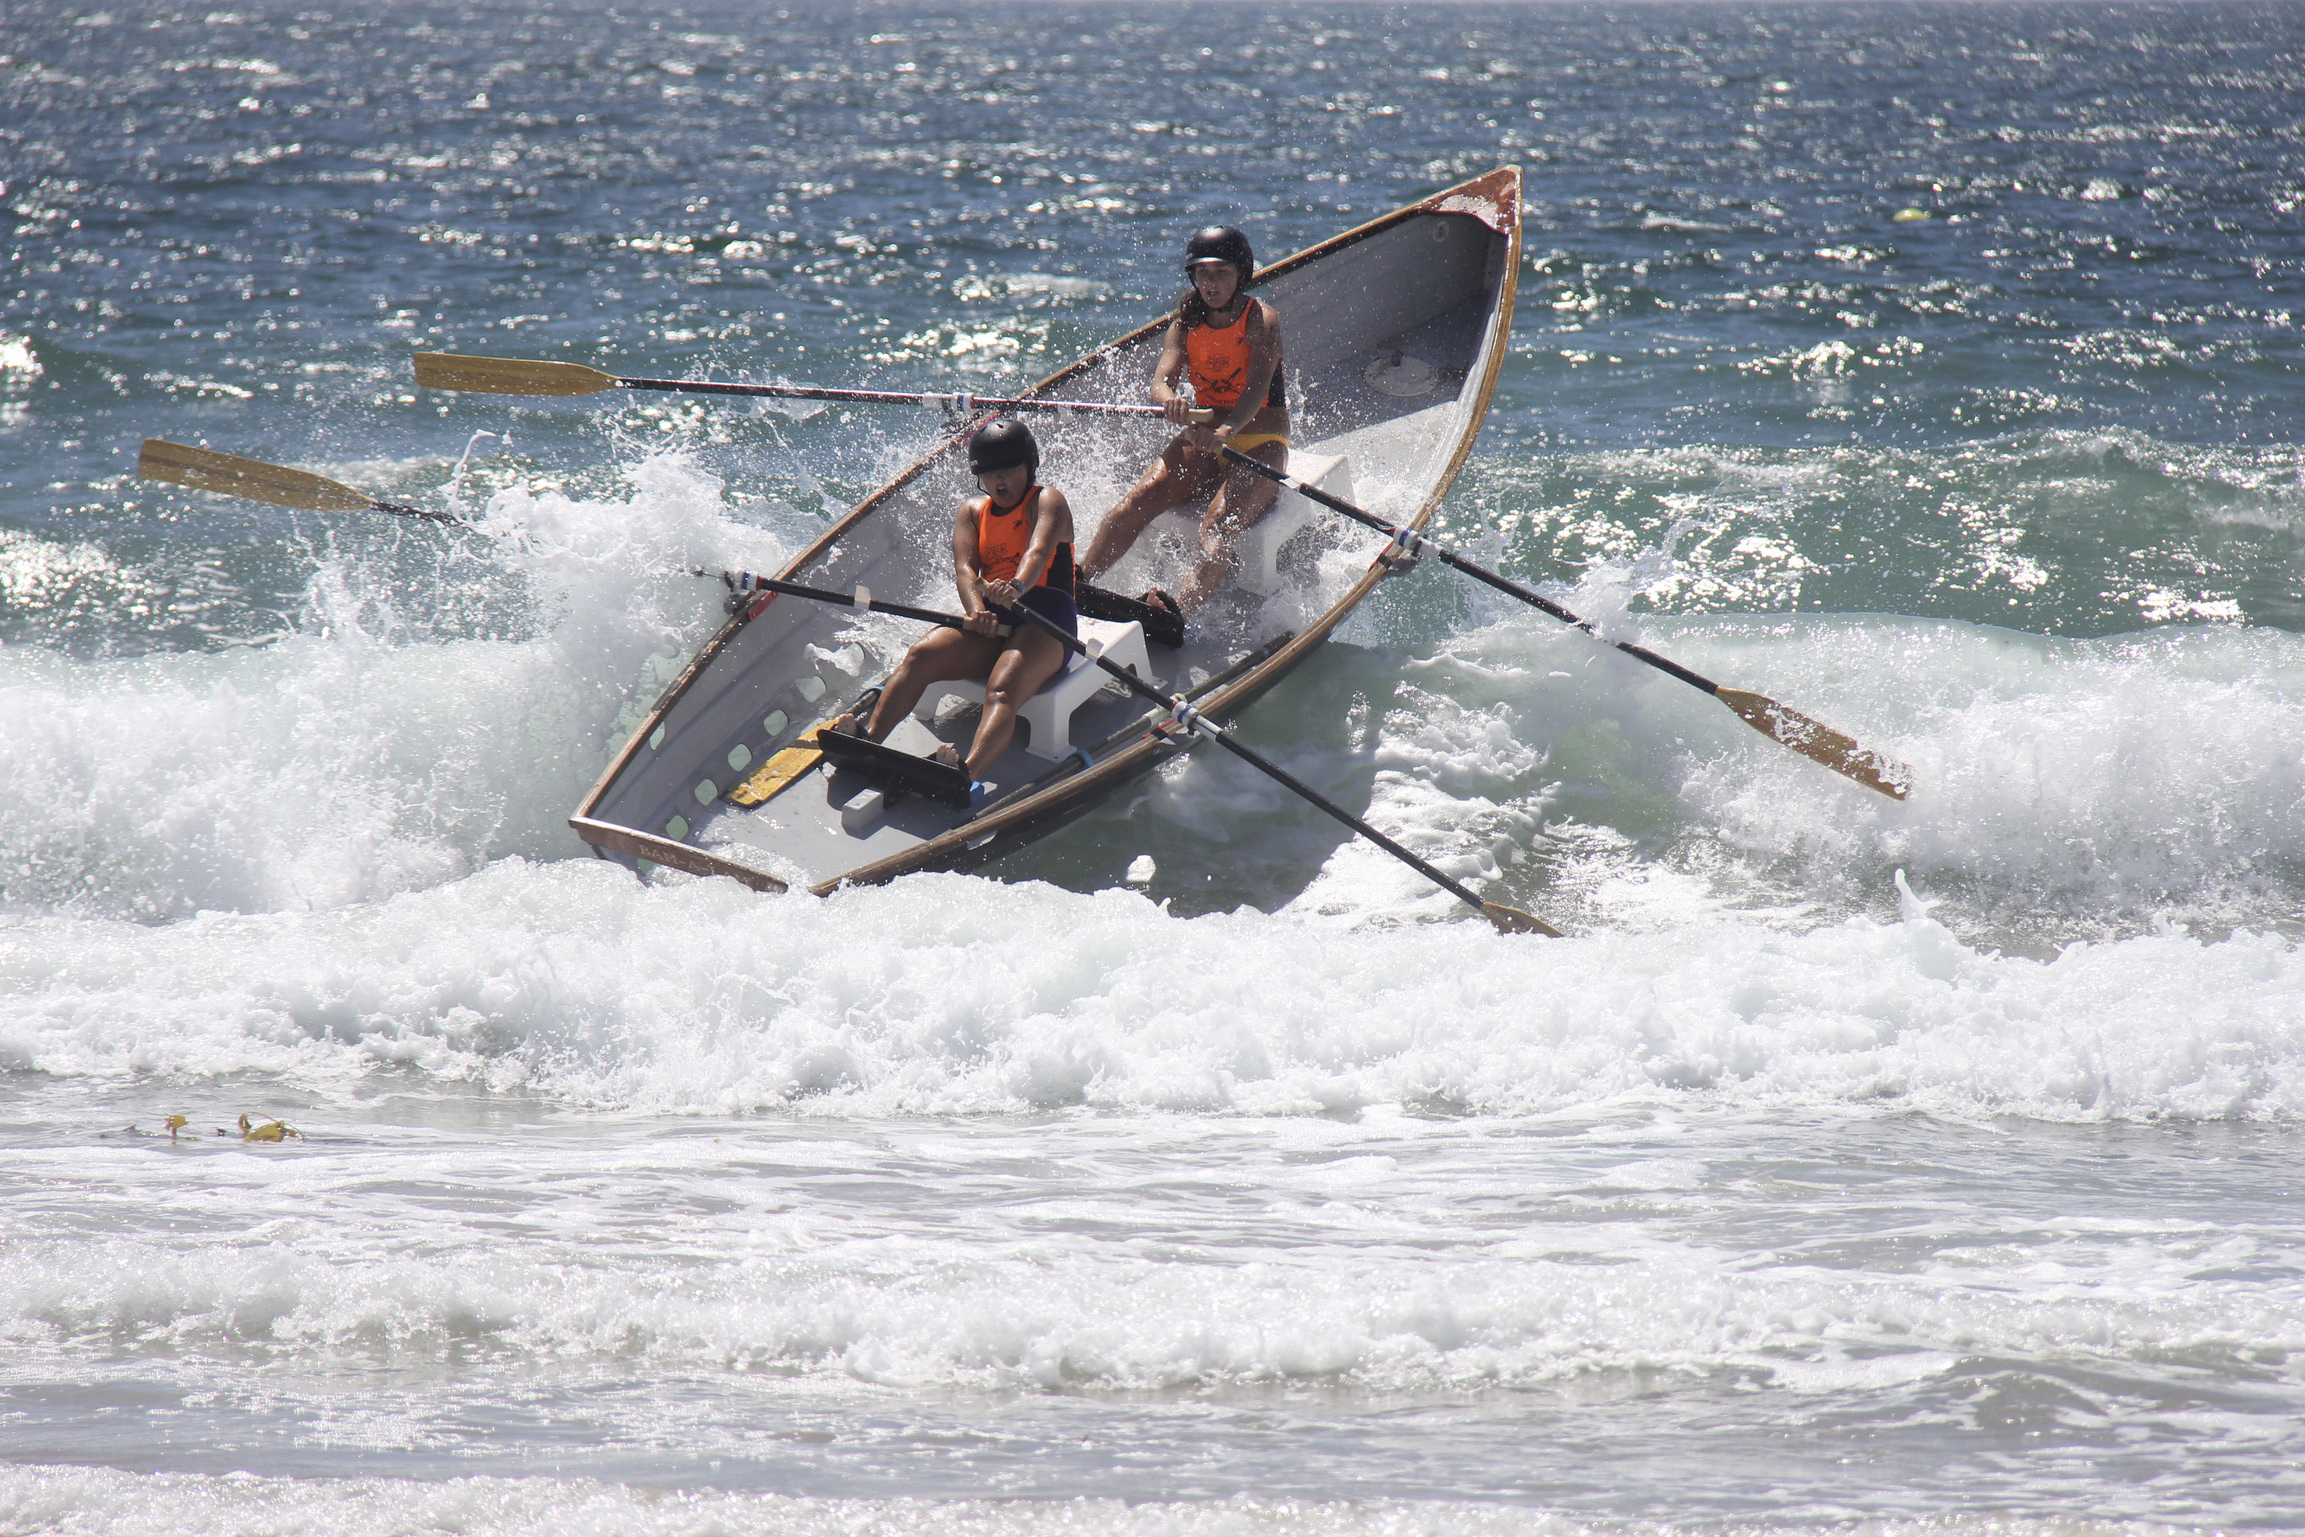 Paige Schaefer and Maura Kane-Seitz hang on while they go over a wave in a surfboat.   NICOLE CASTILLO